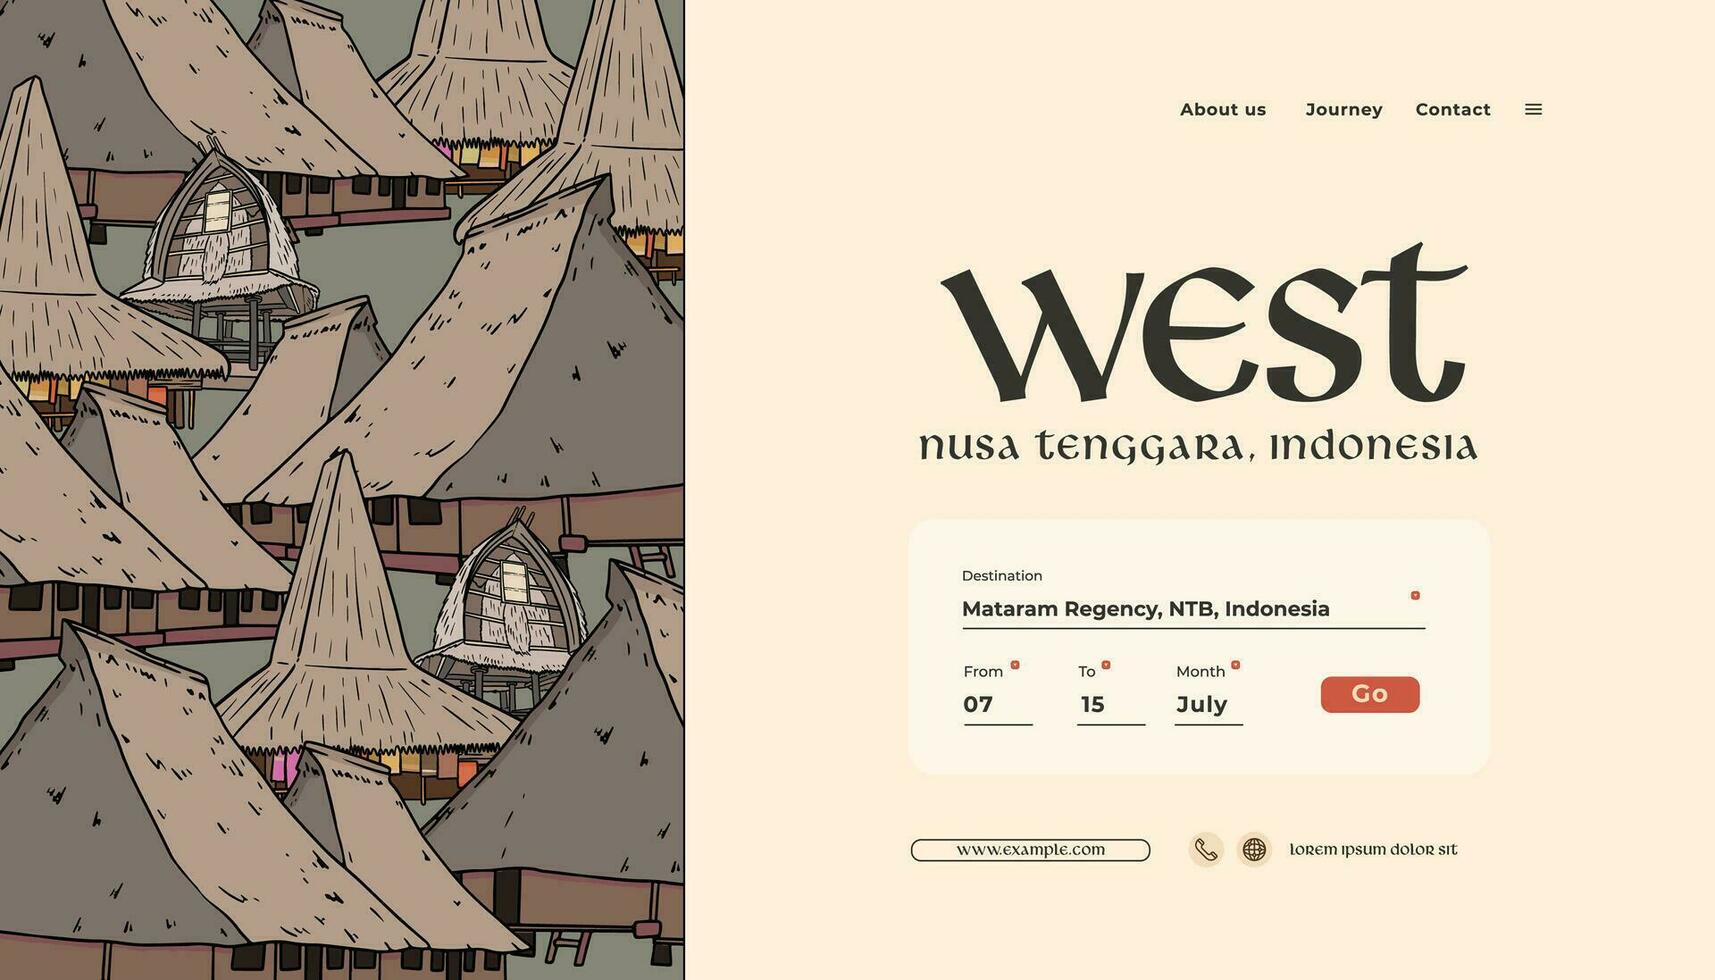 Indonesia Nusa Tenggara design layout idea for social media or event background vector